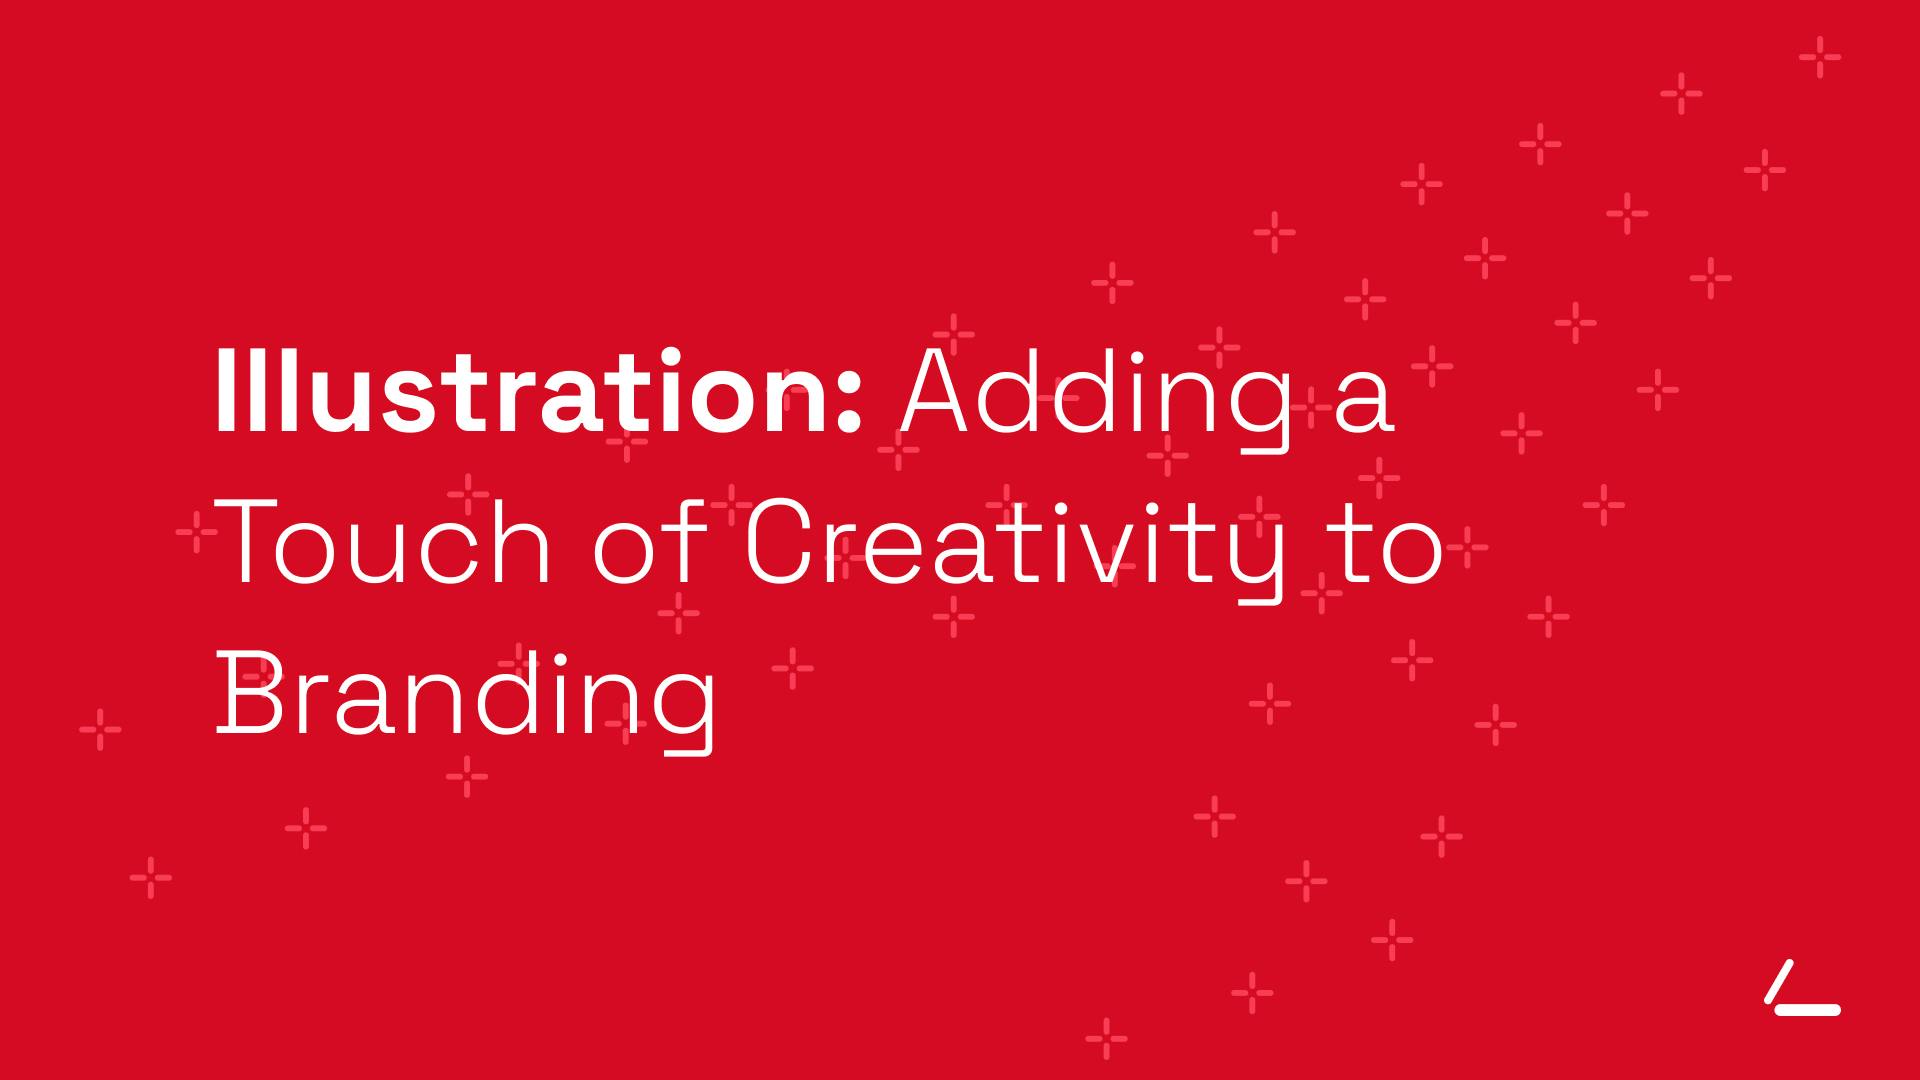 SEO Article Header - Red background with text about Illustration